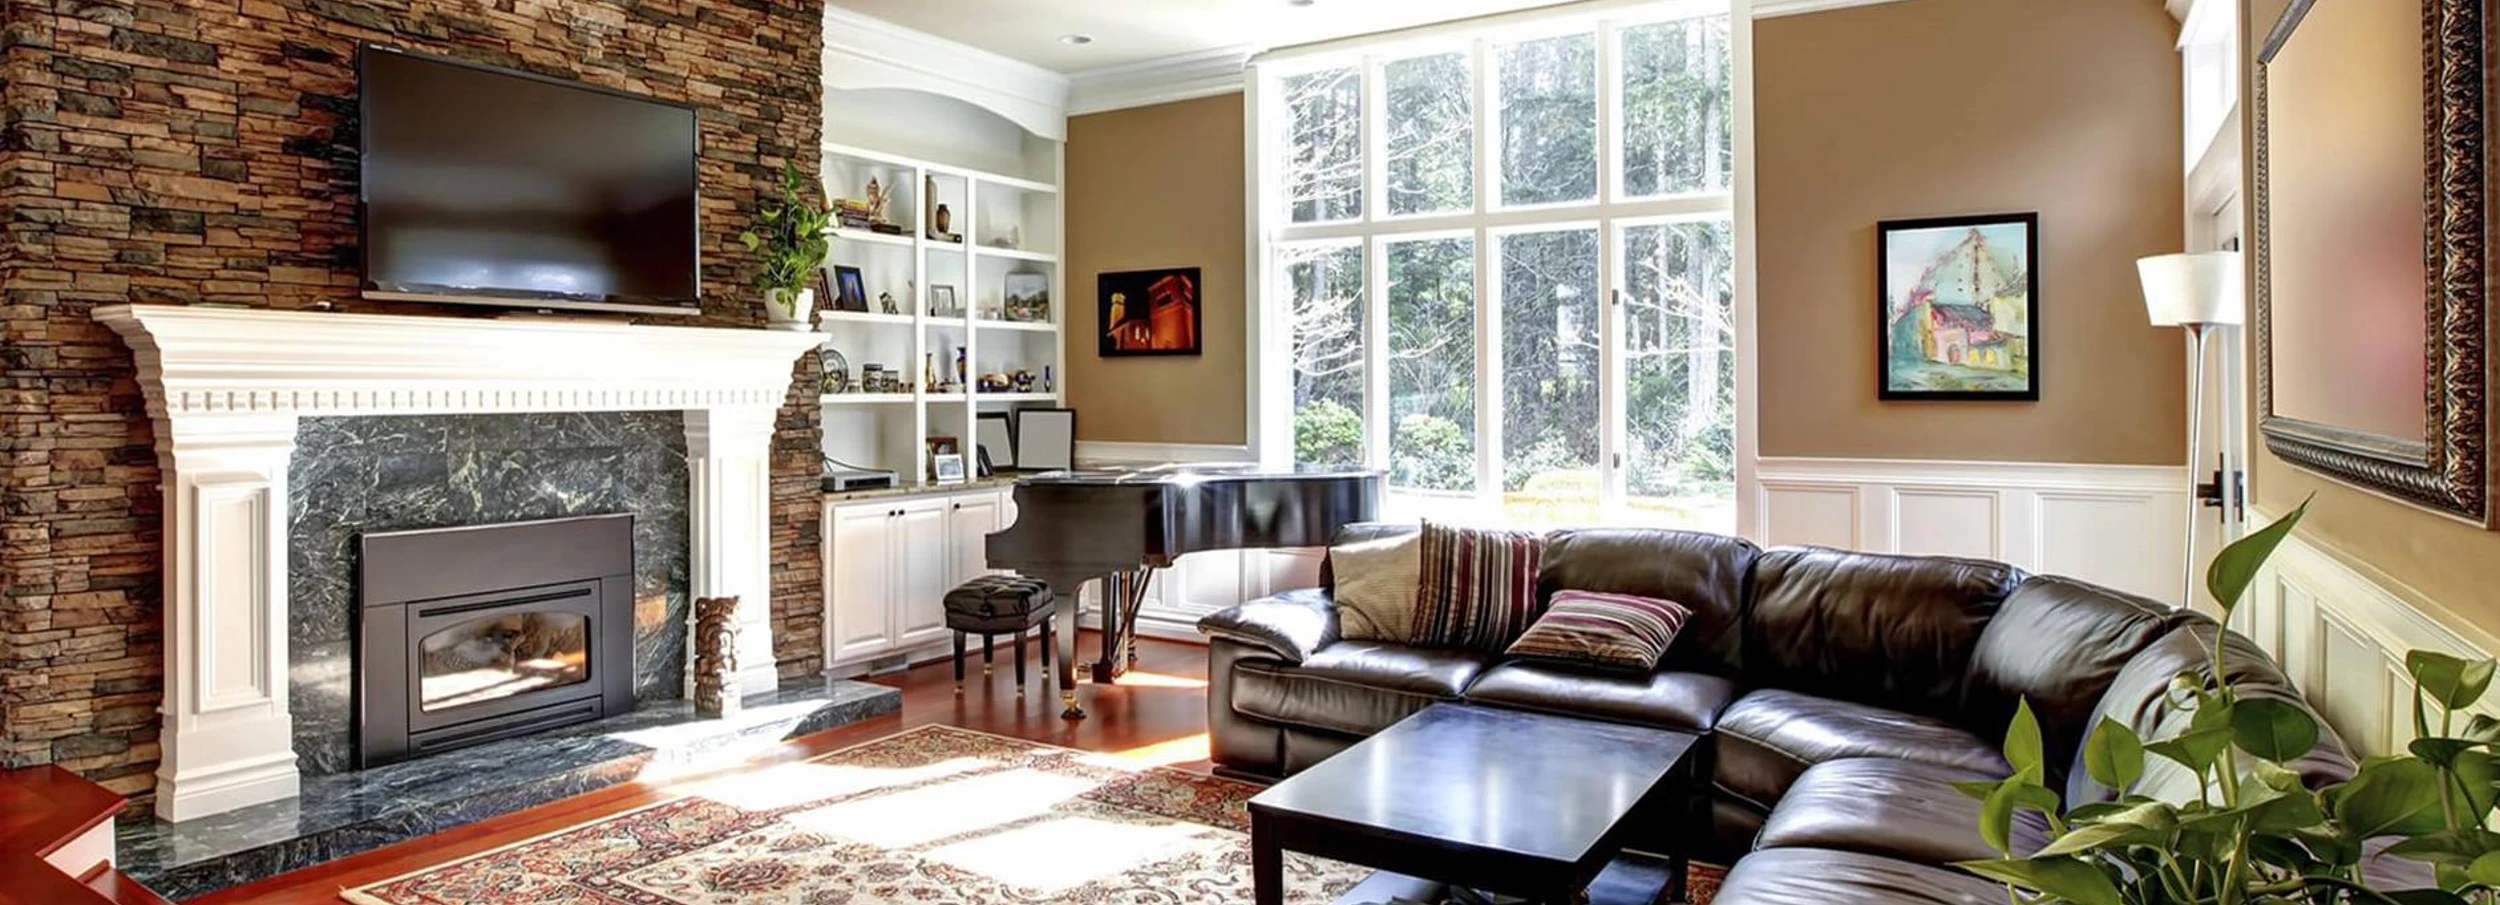 Comfortable brown leather sofa with fireplace and windows looking out to trees in yard.